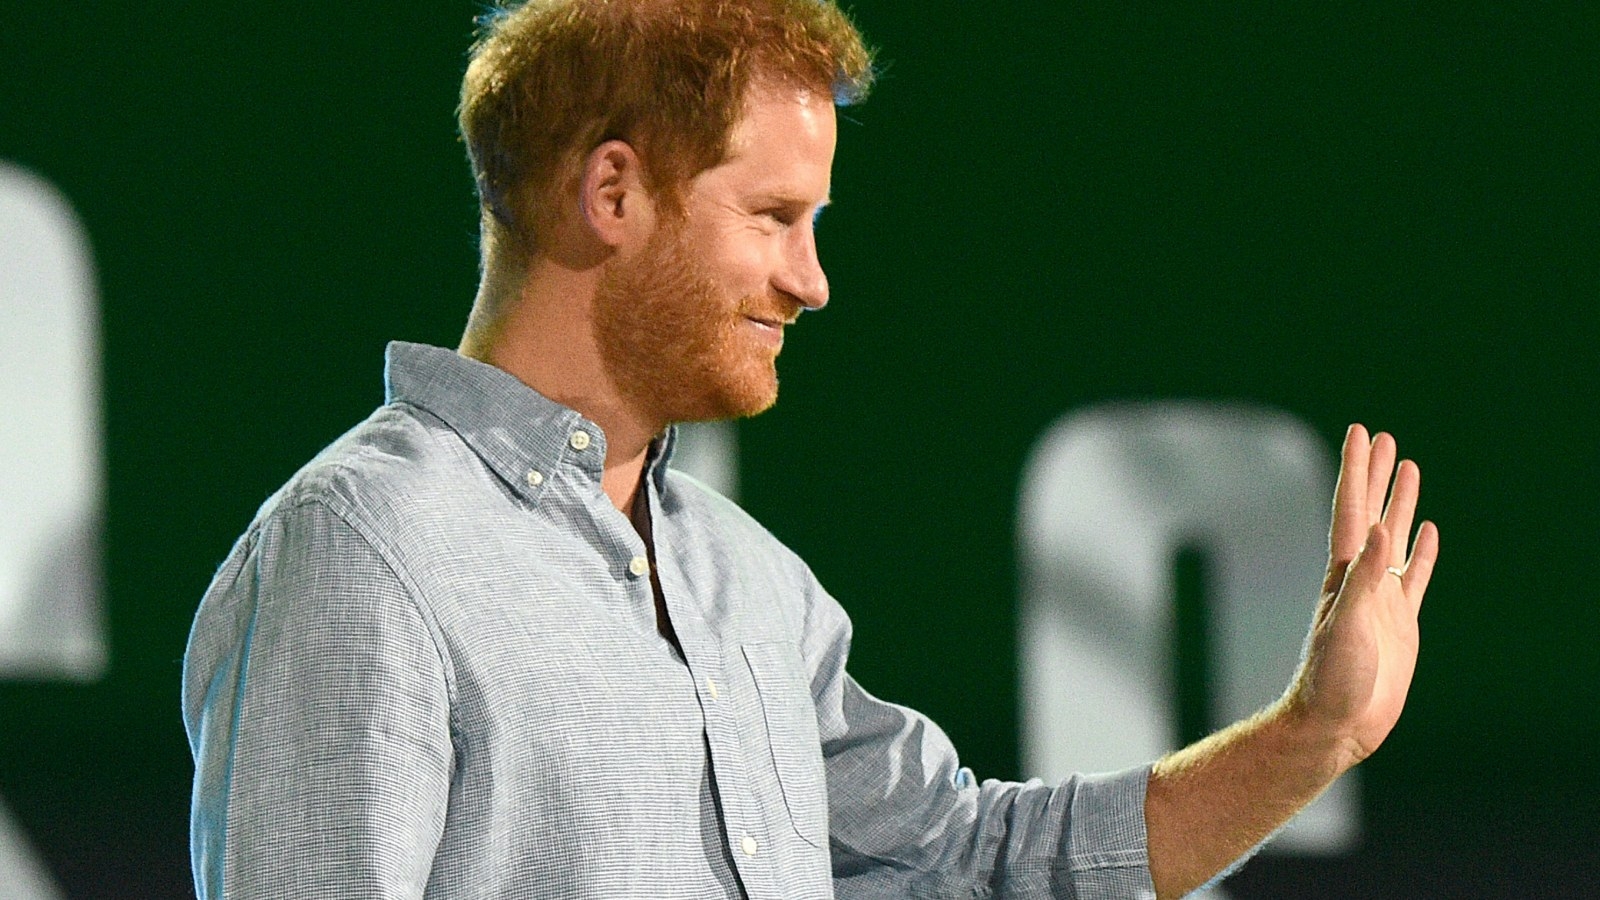 World breaking news today (May 14): Prince Harry appears to criticise way he was raised by his father